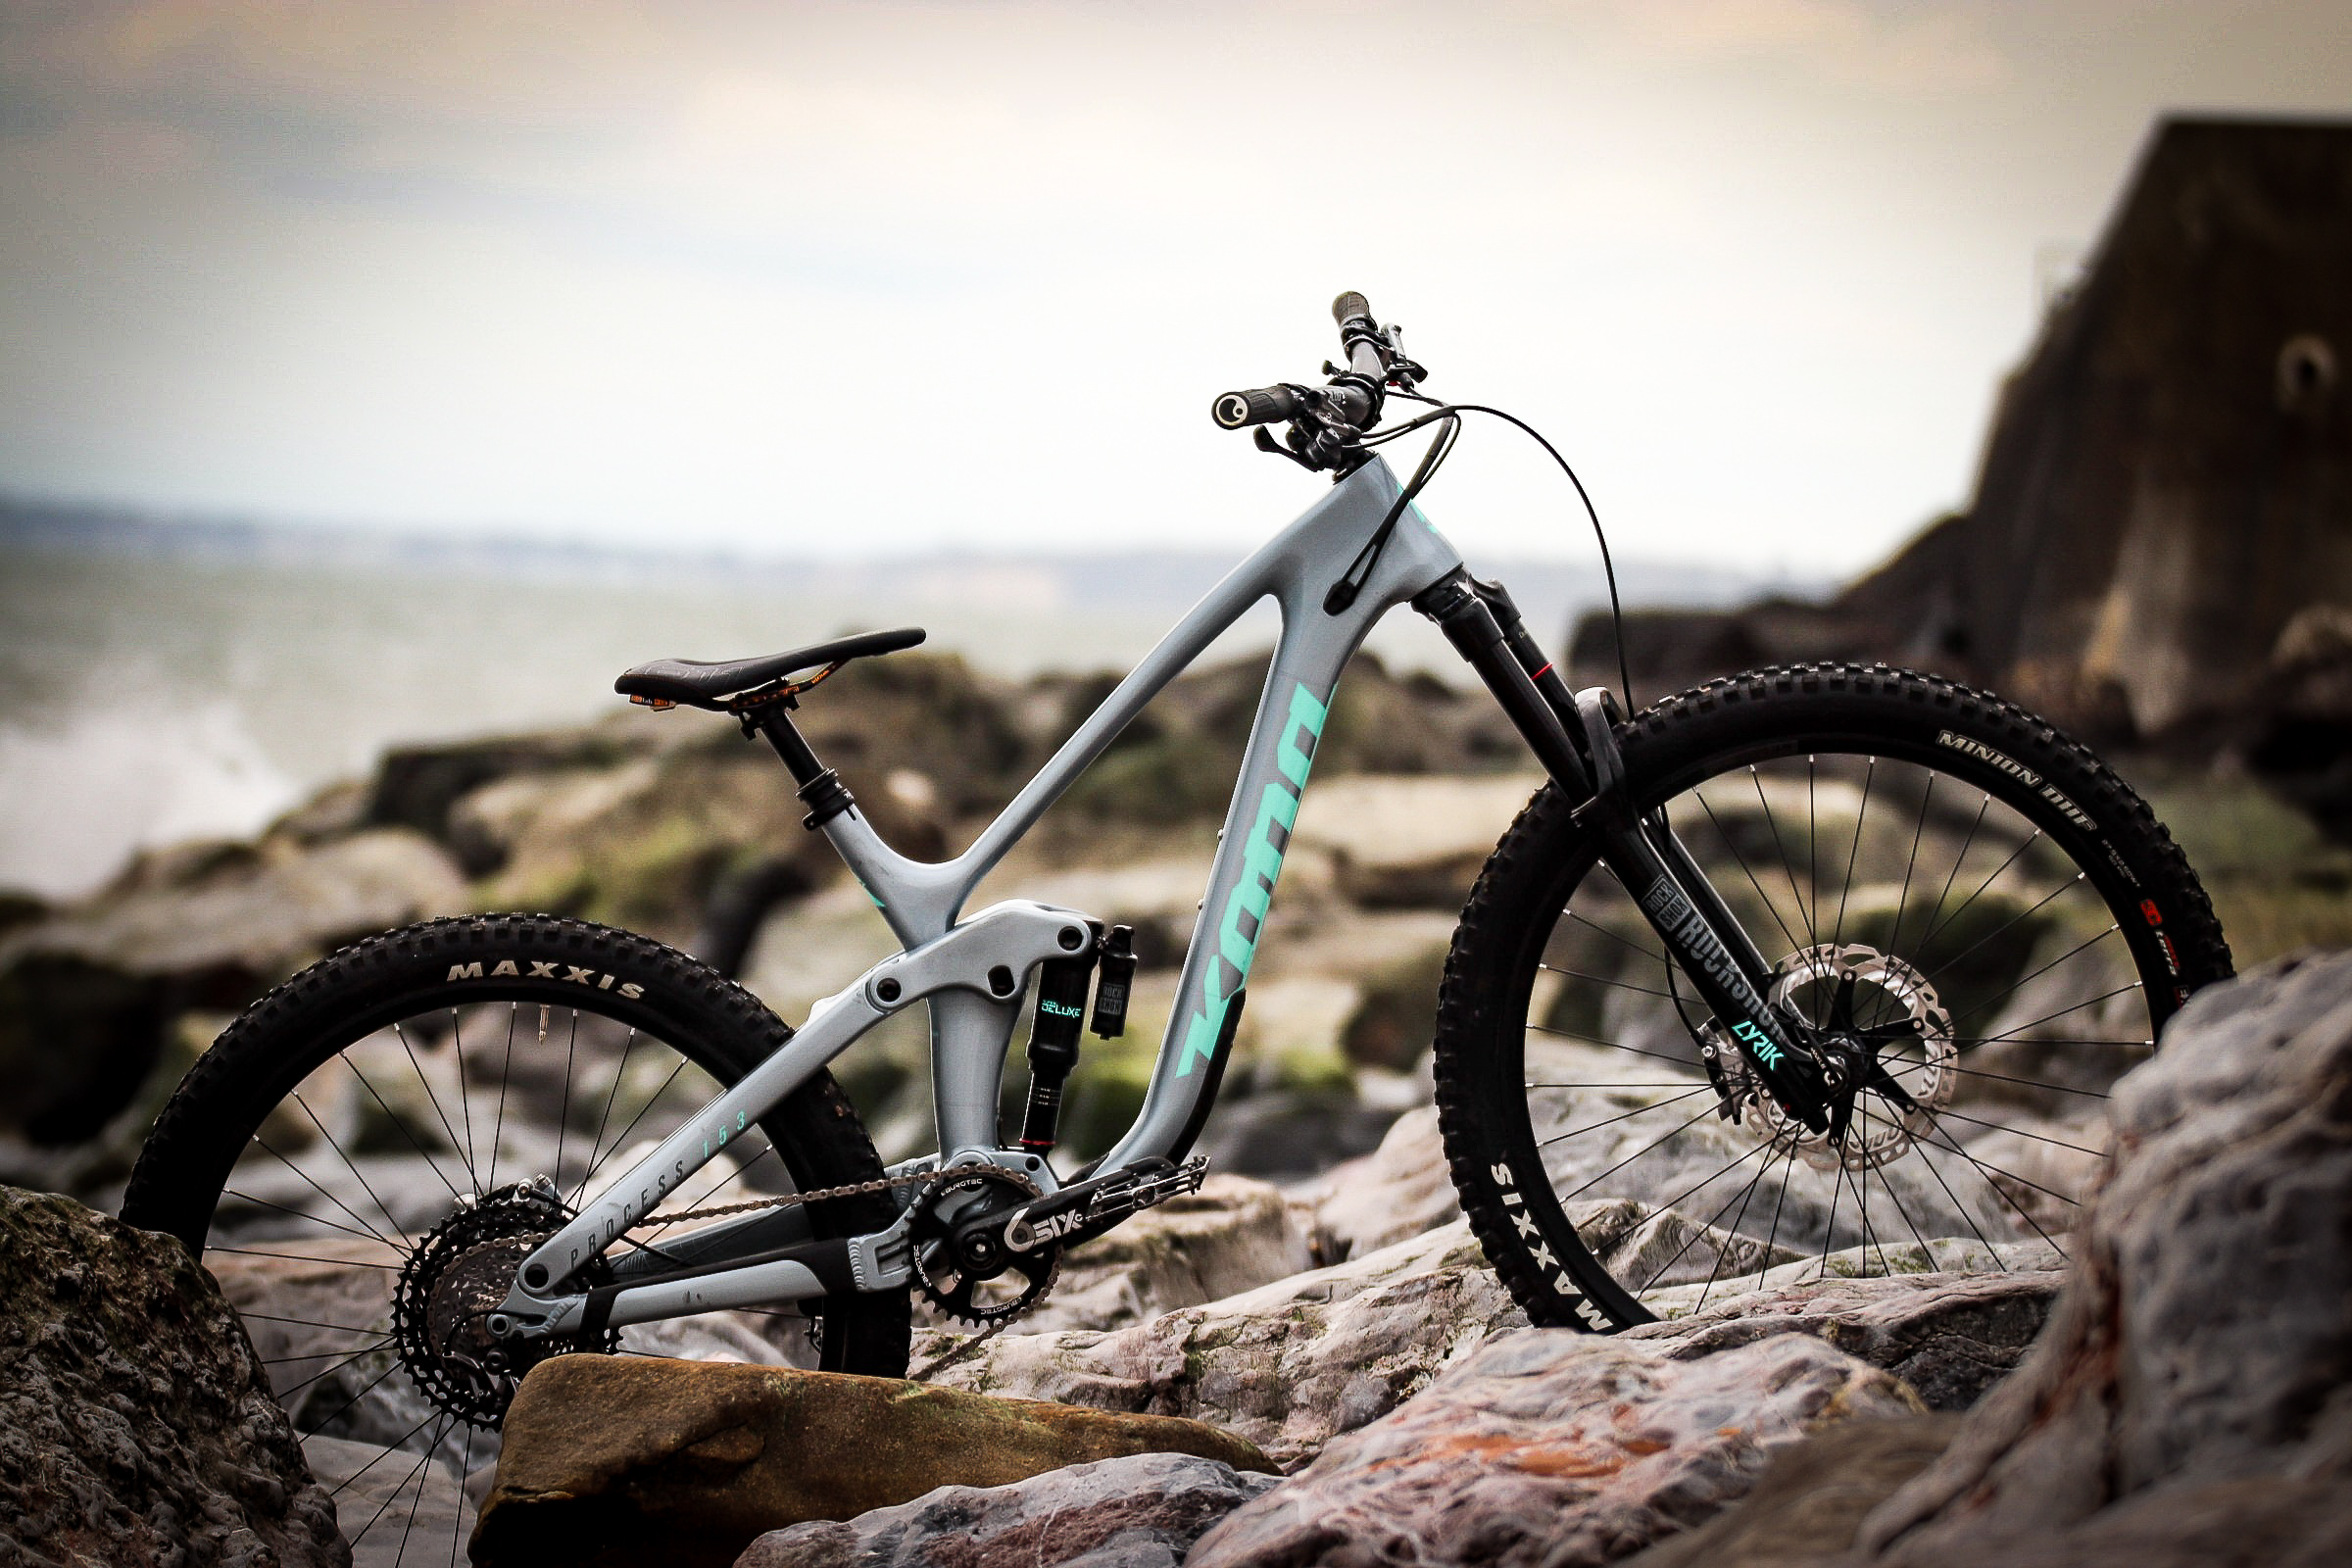 Kona Dream Builds: Arran’s “Awesome whether Riding or Posing” Process